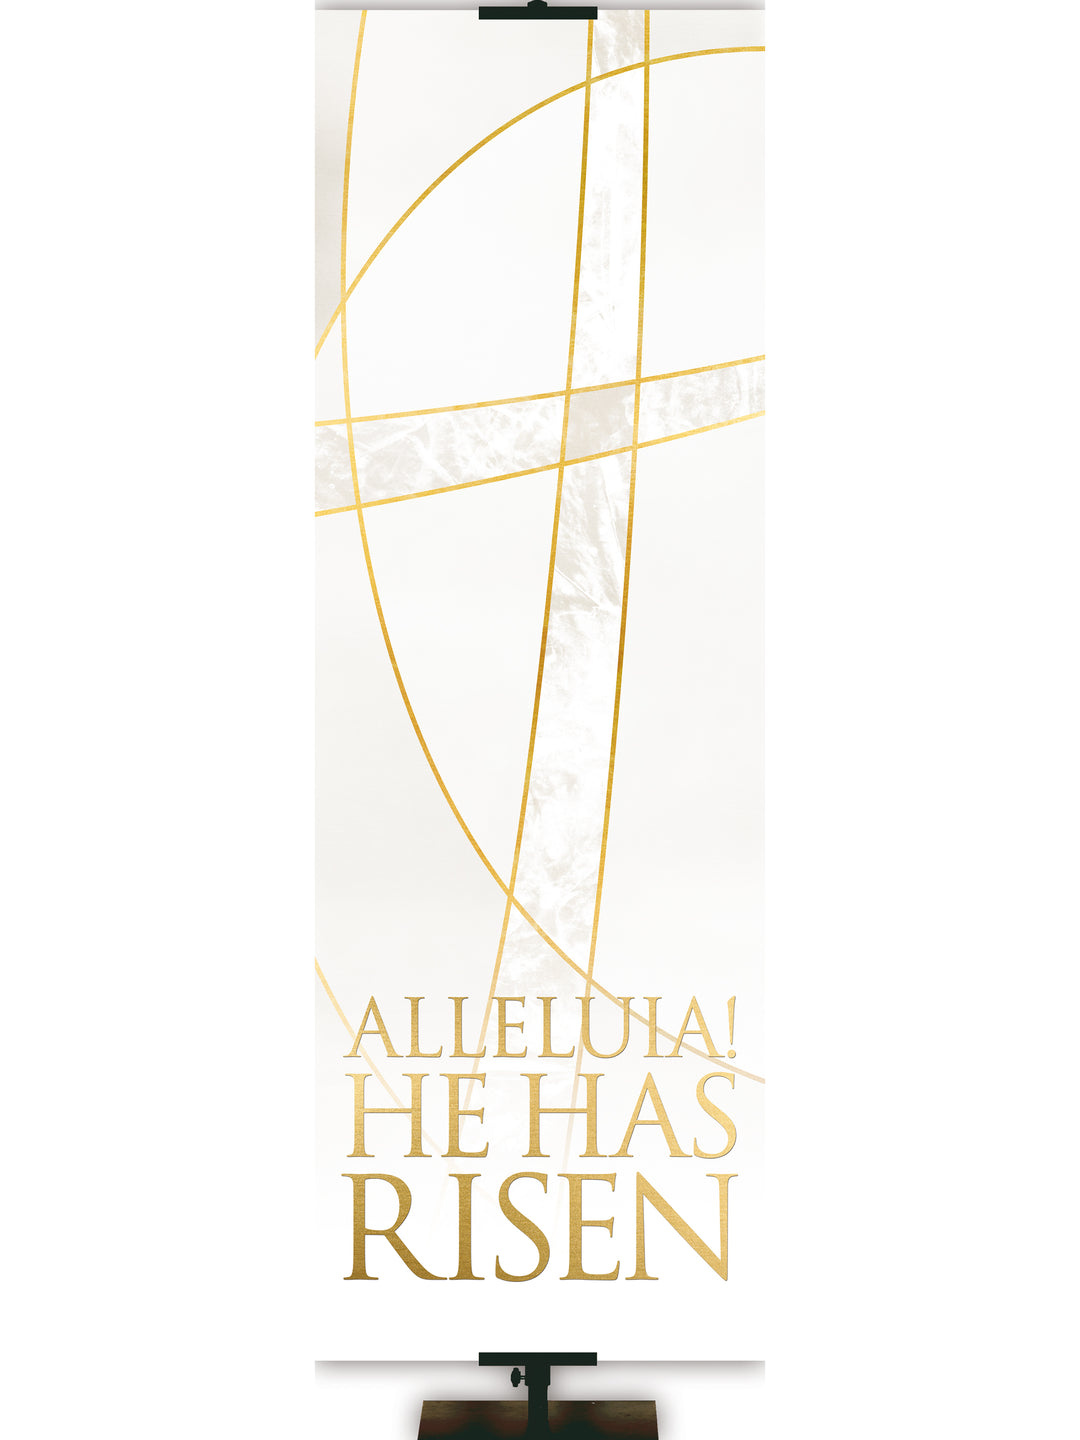 Easter Liturgy Alleluia on White Banner with Gold Stylized Cross and gold accents on thin format with left orientation